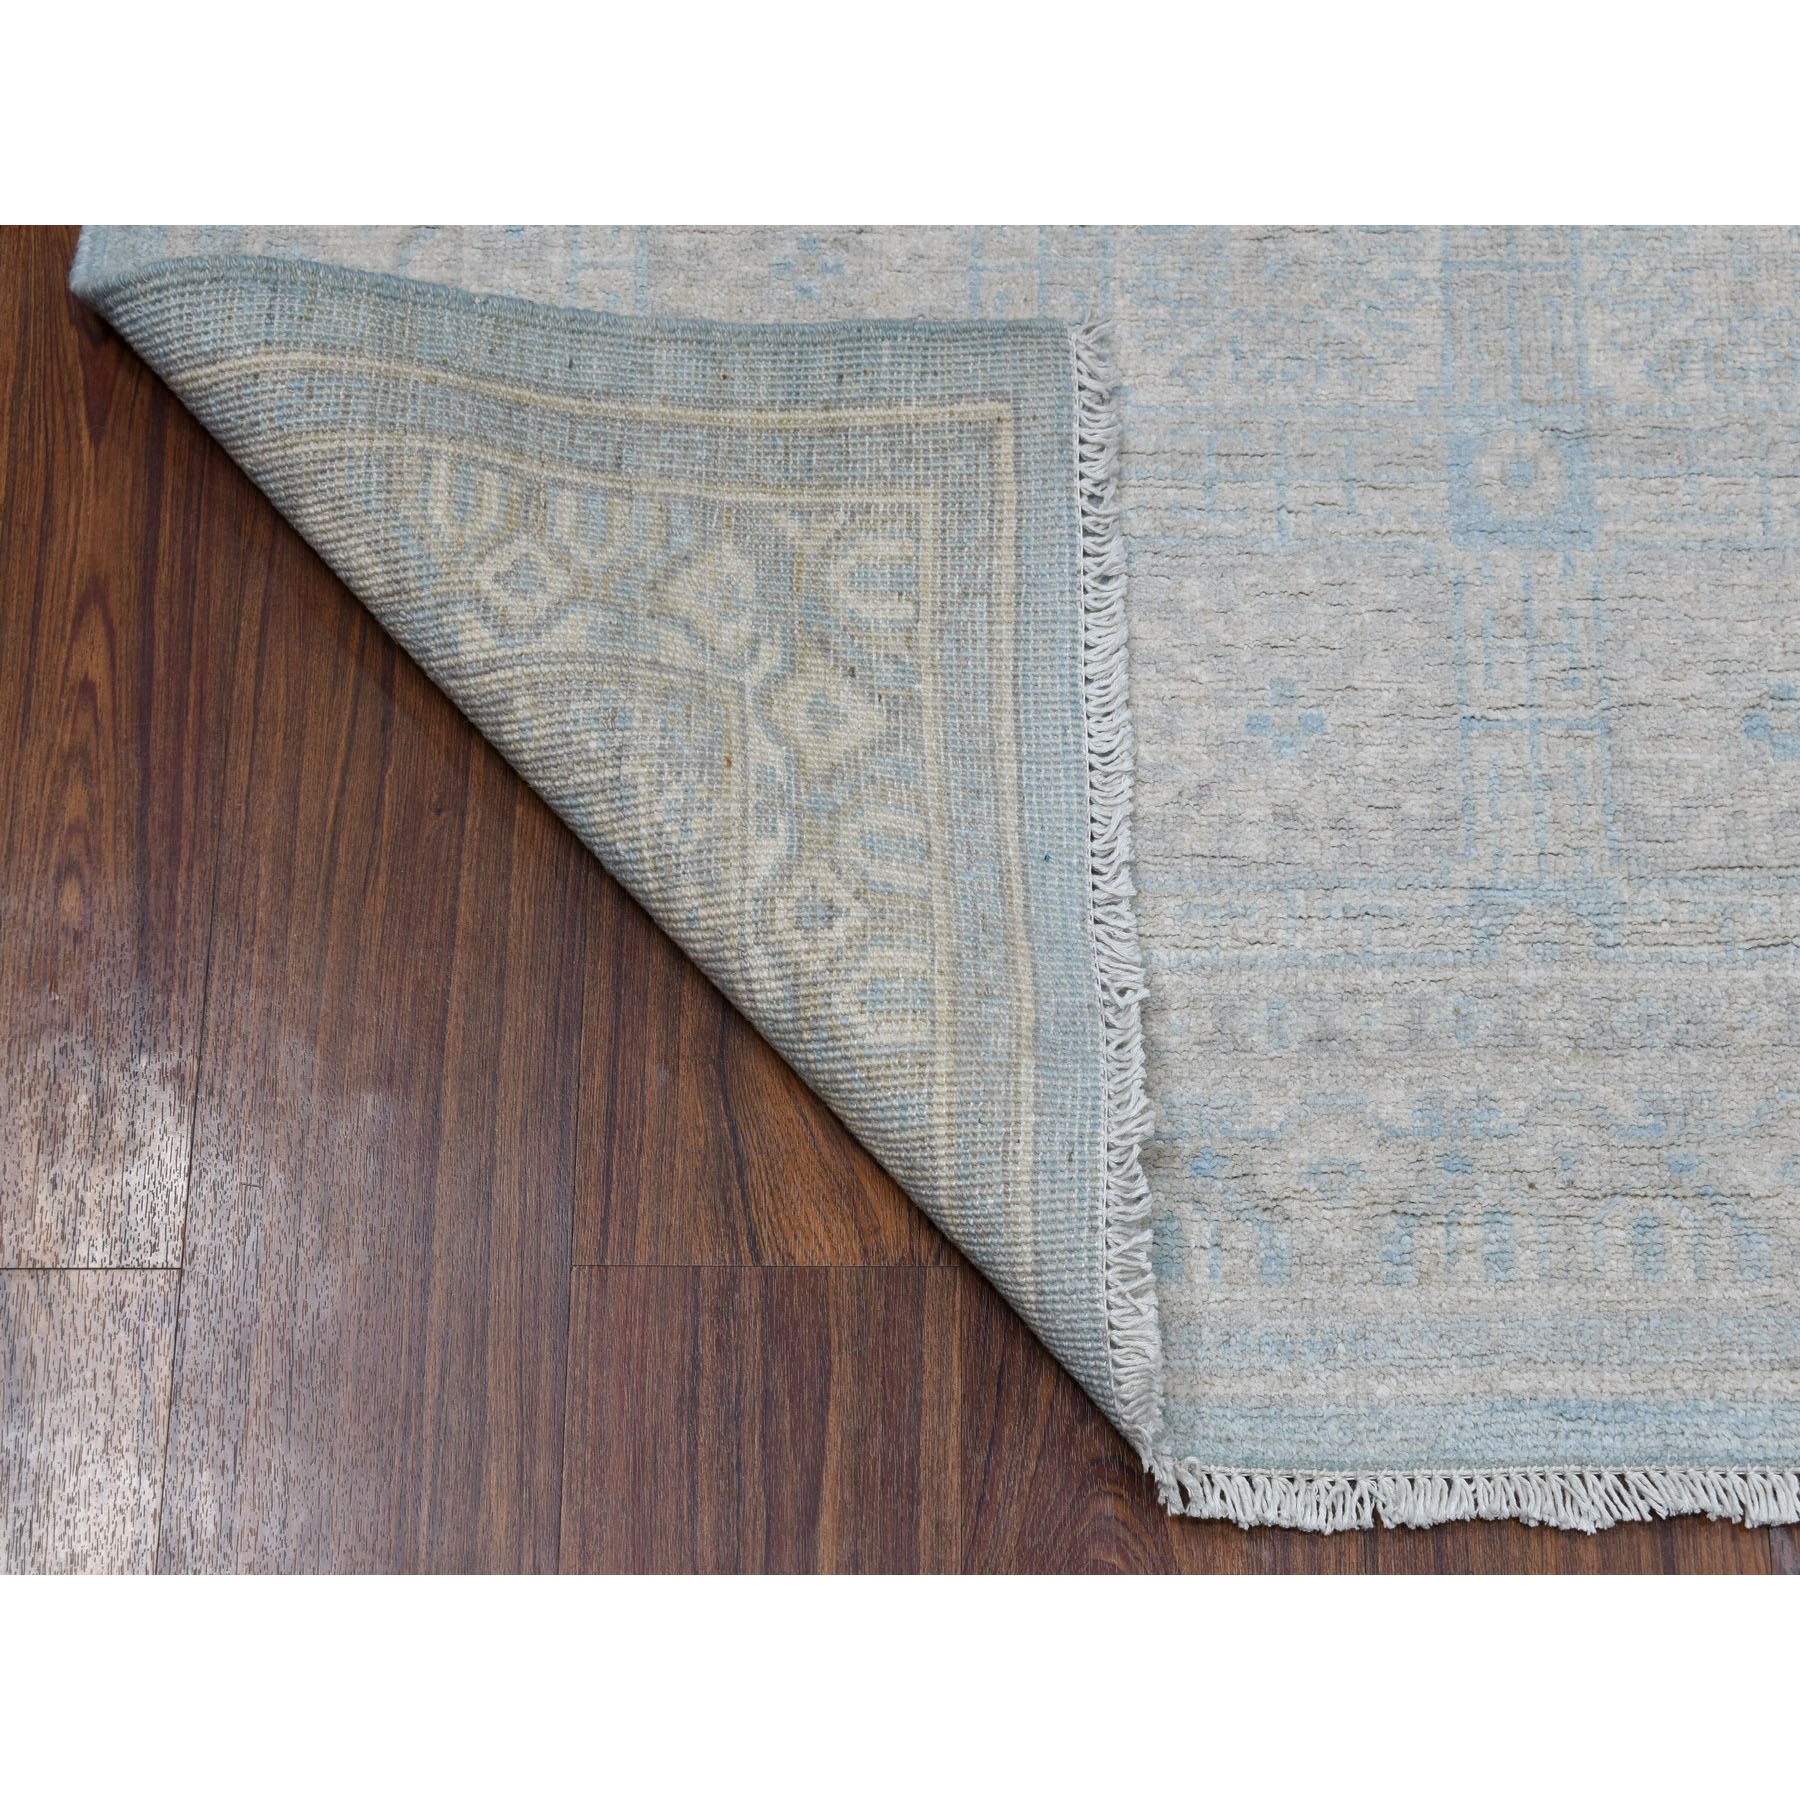 4-x5-9  Samarkand With Khotan Repetitive Rossets Design Hand Knotted Oriental Rug 